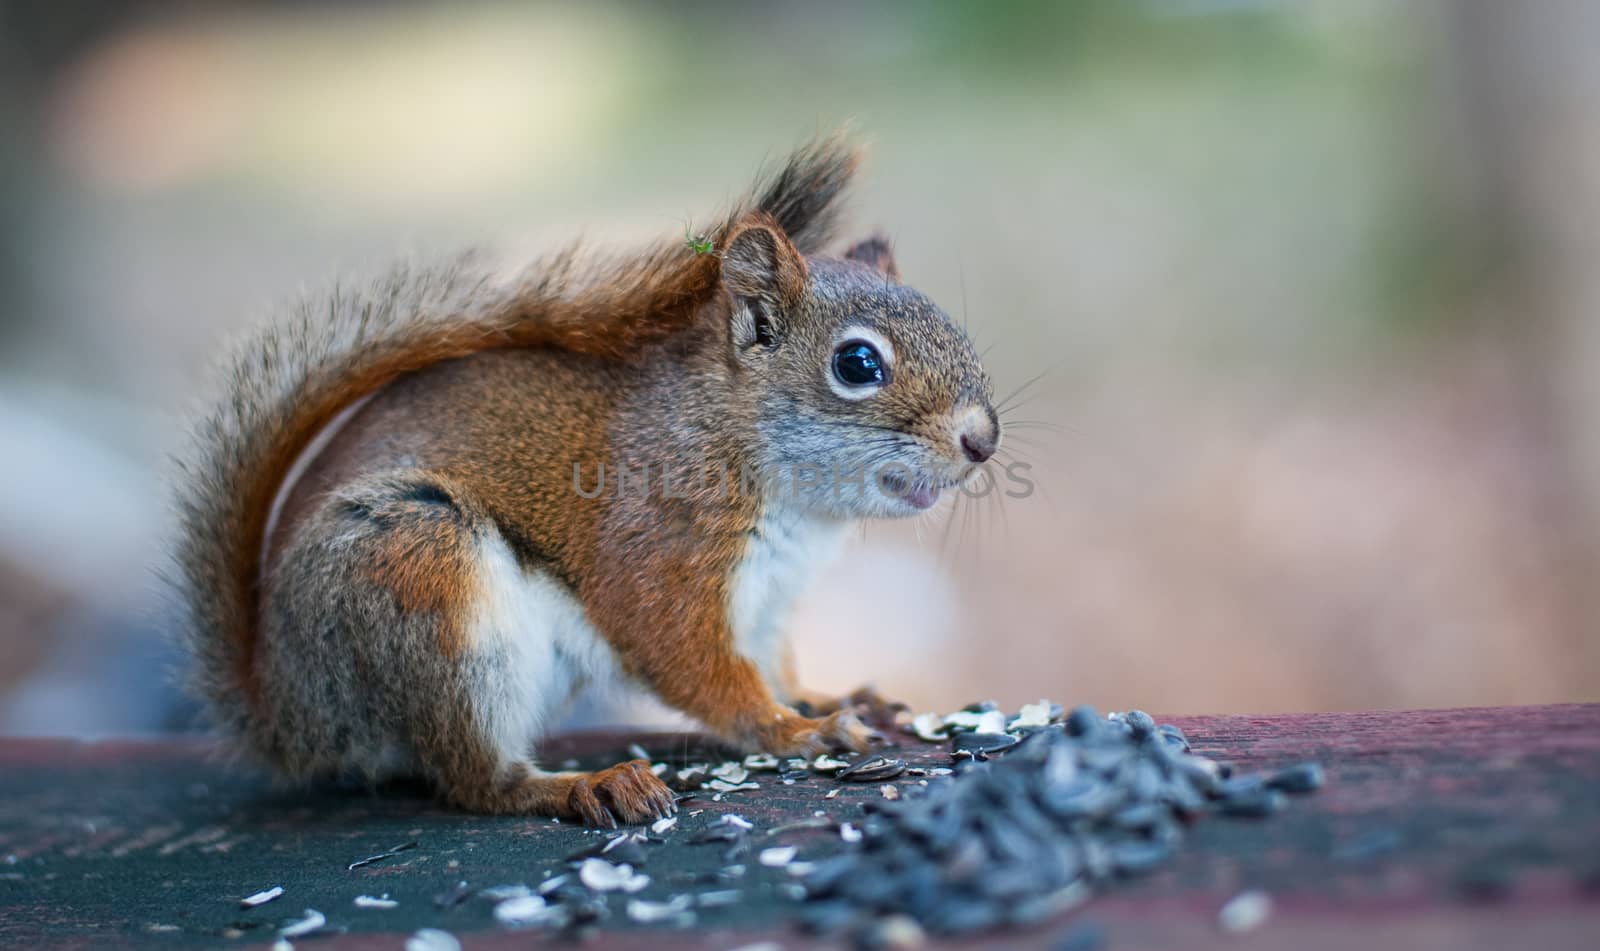 A red squirrel in a Northern Ontario woods sits down on a patio railing to eat sunflower seeds.